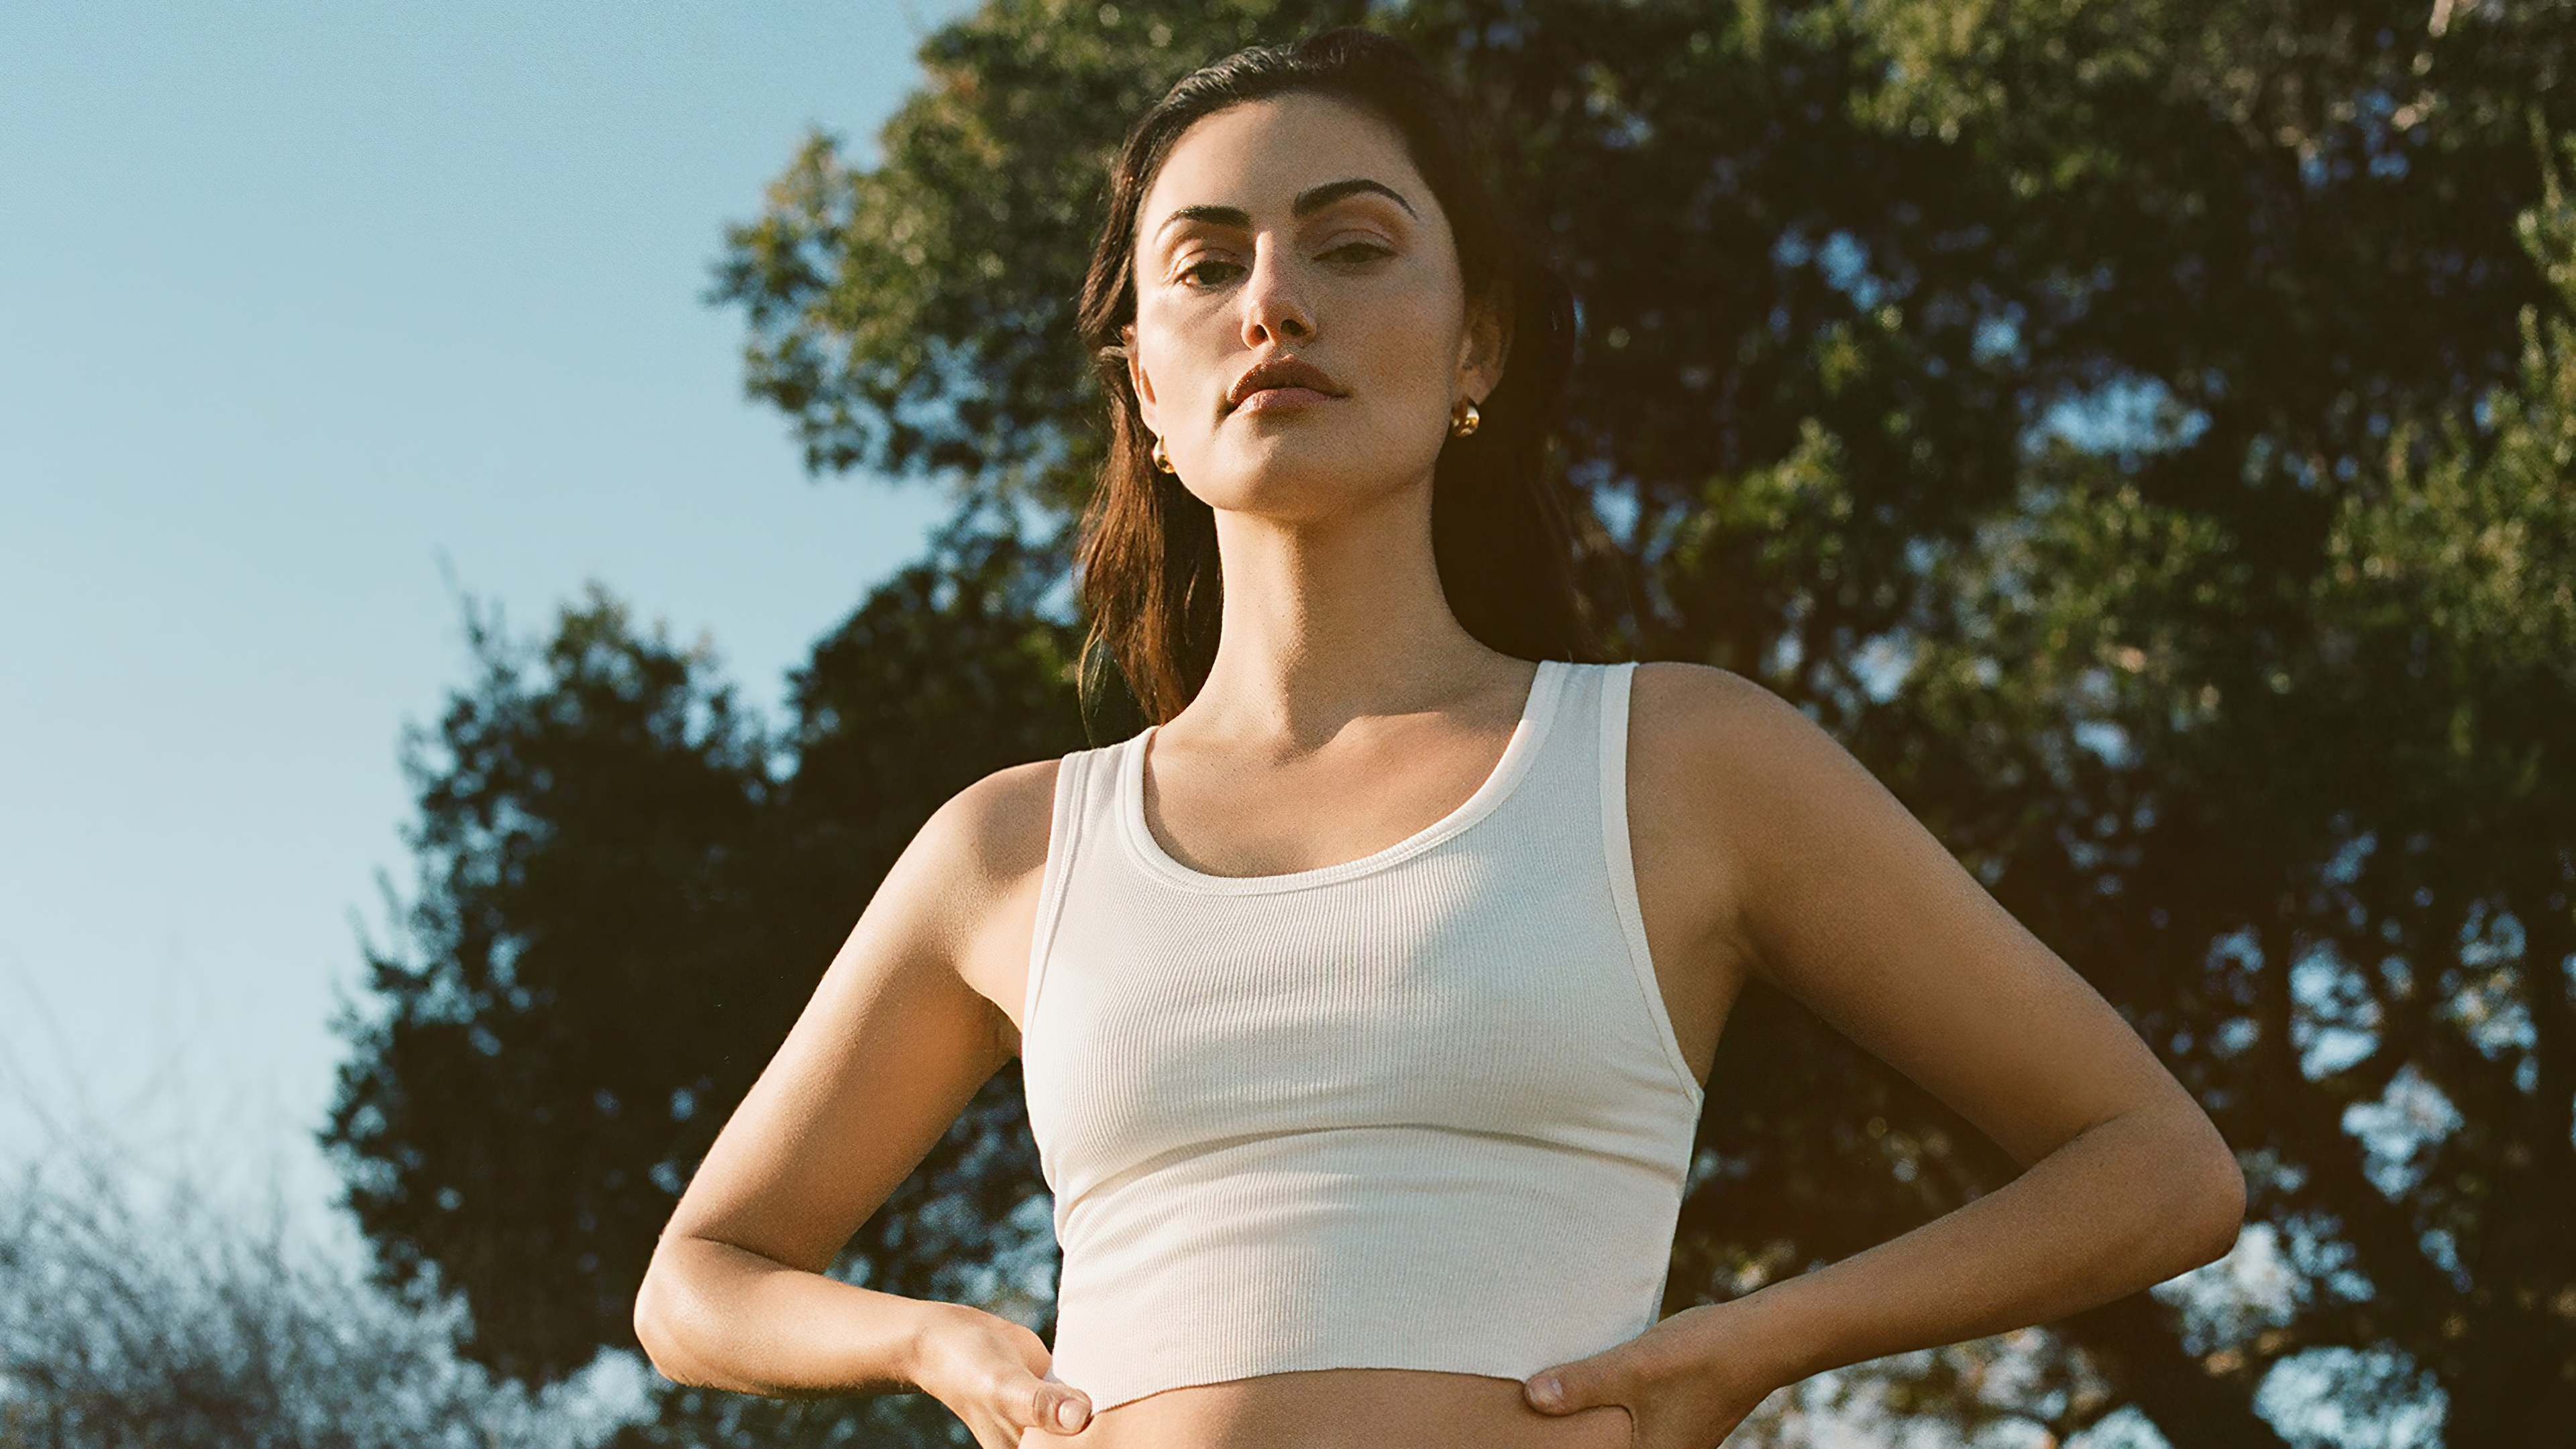 Portrait of Phoebe Tonkin in a short white top